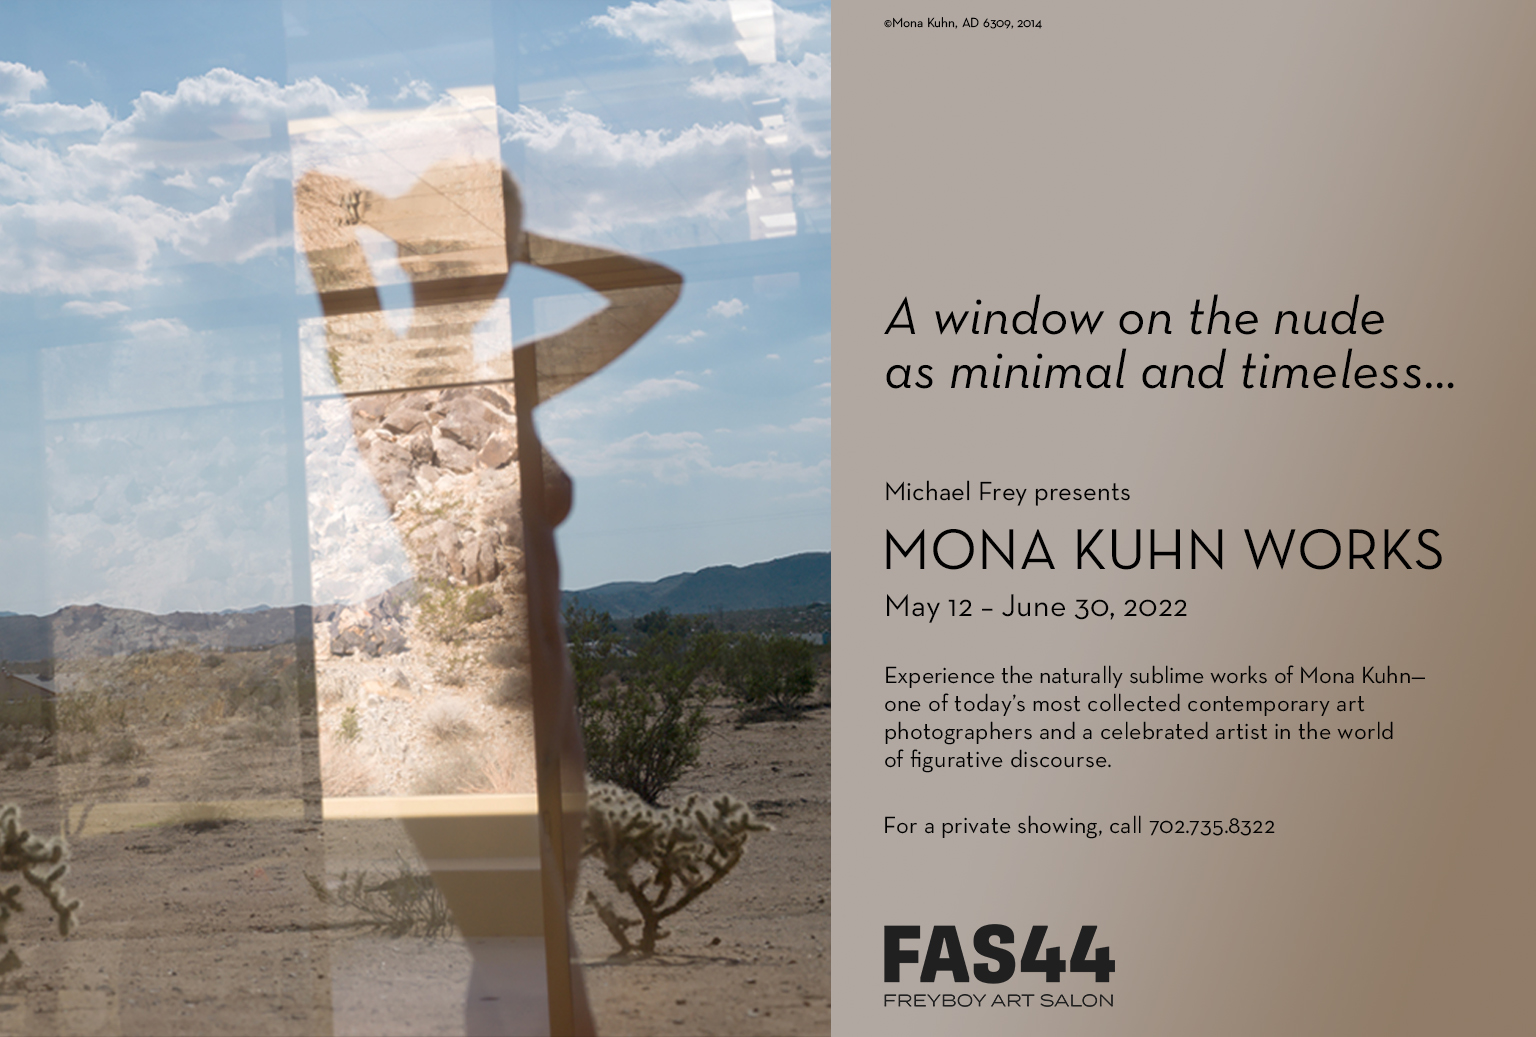 Featured Exhibition - A window on the nude as minimal and timeless by Mona Kuhn - May 12 - June 30 2022